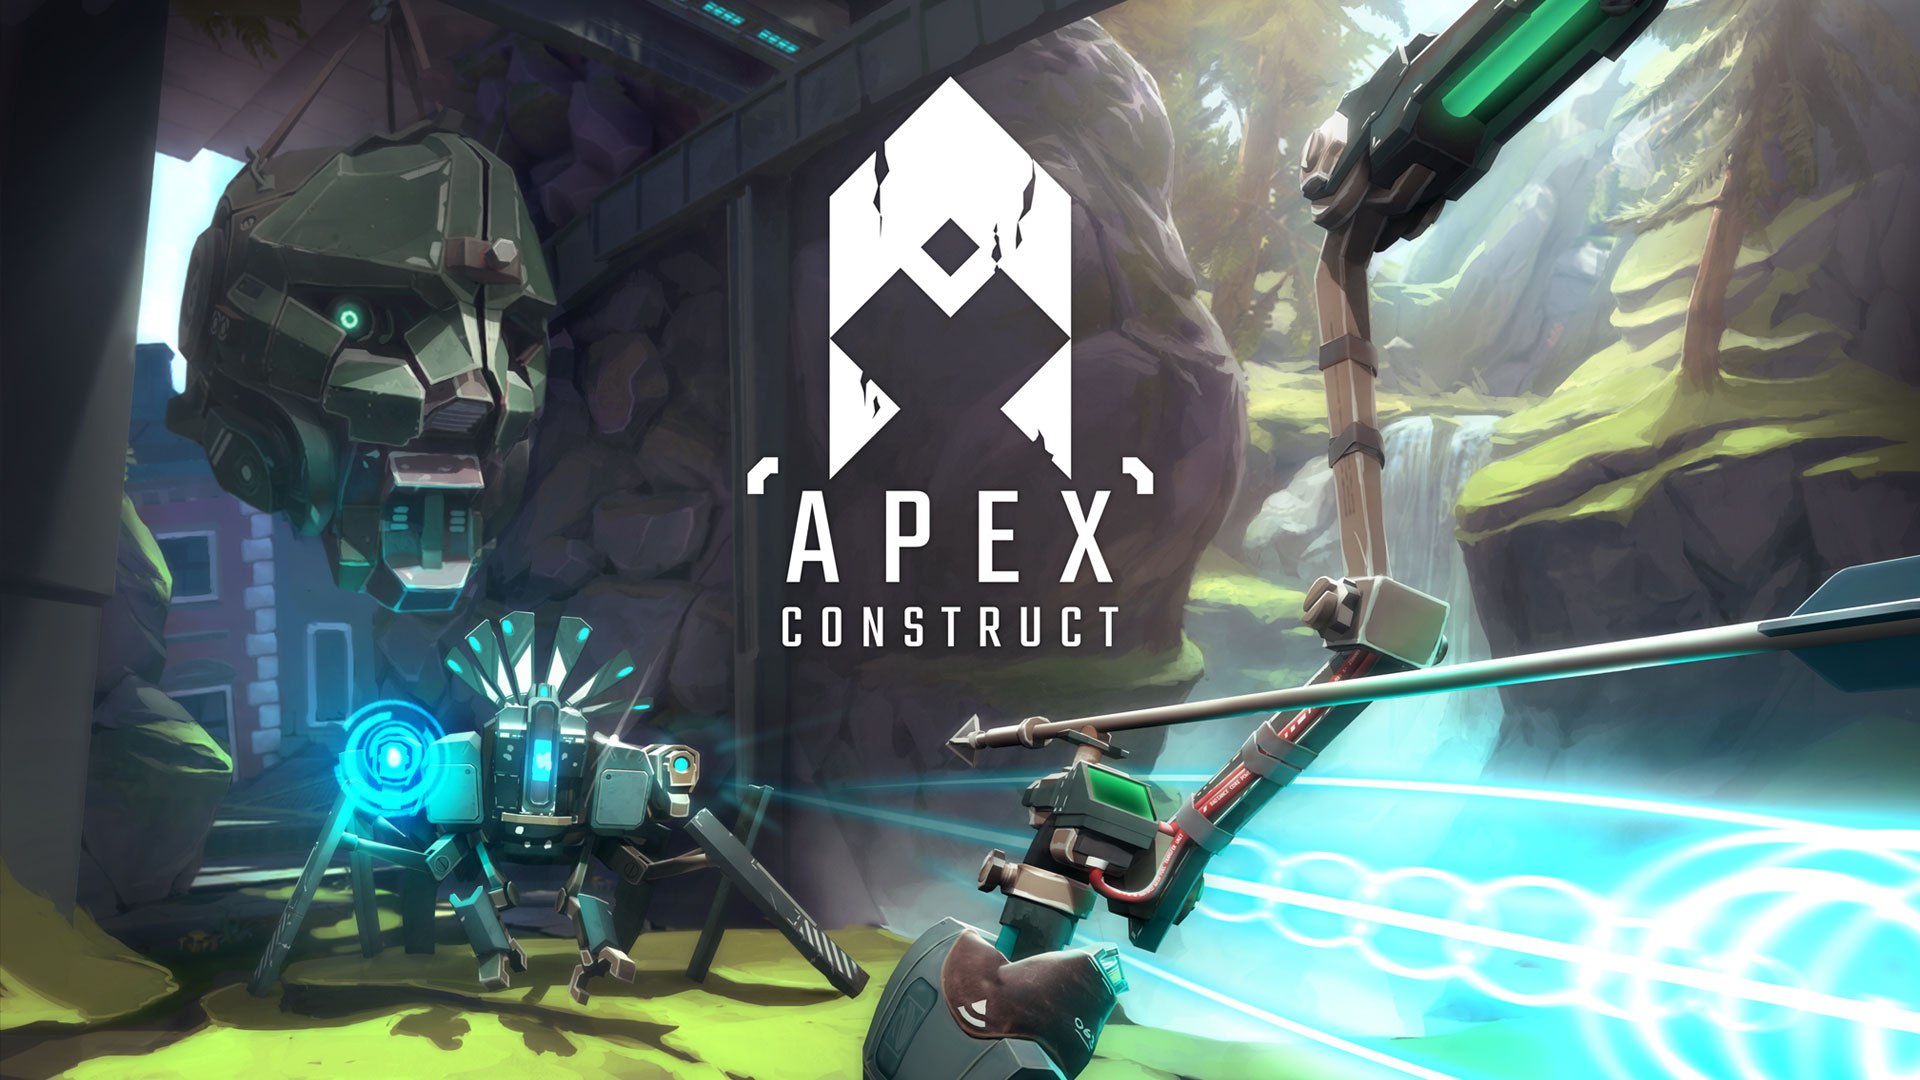 Apex Construct Review – VR Dystopian Goodness